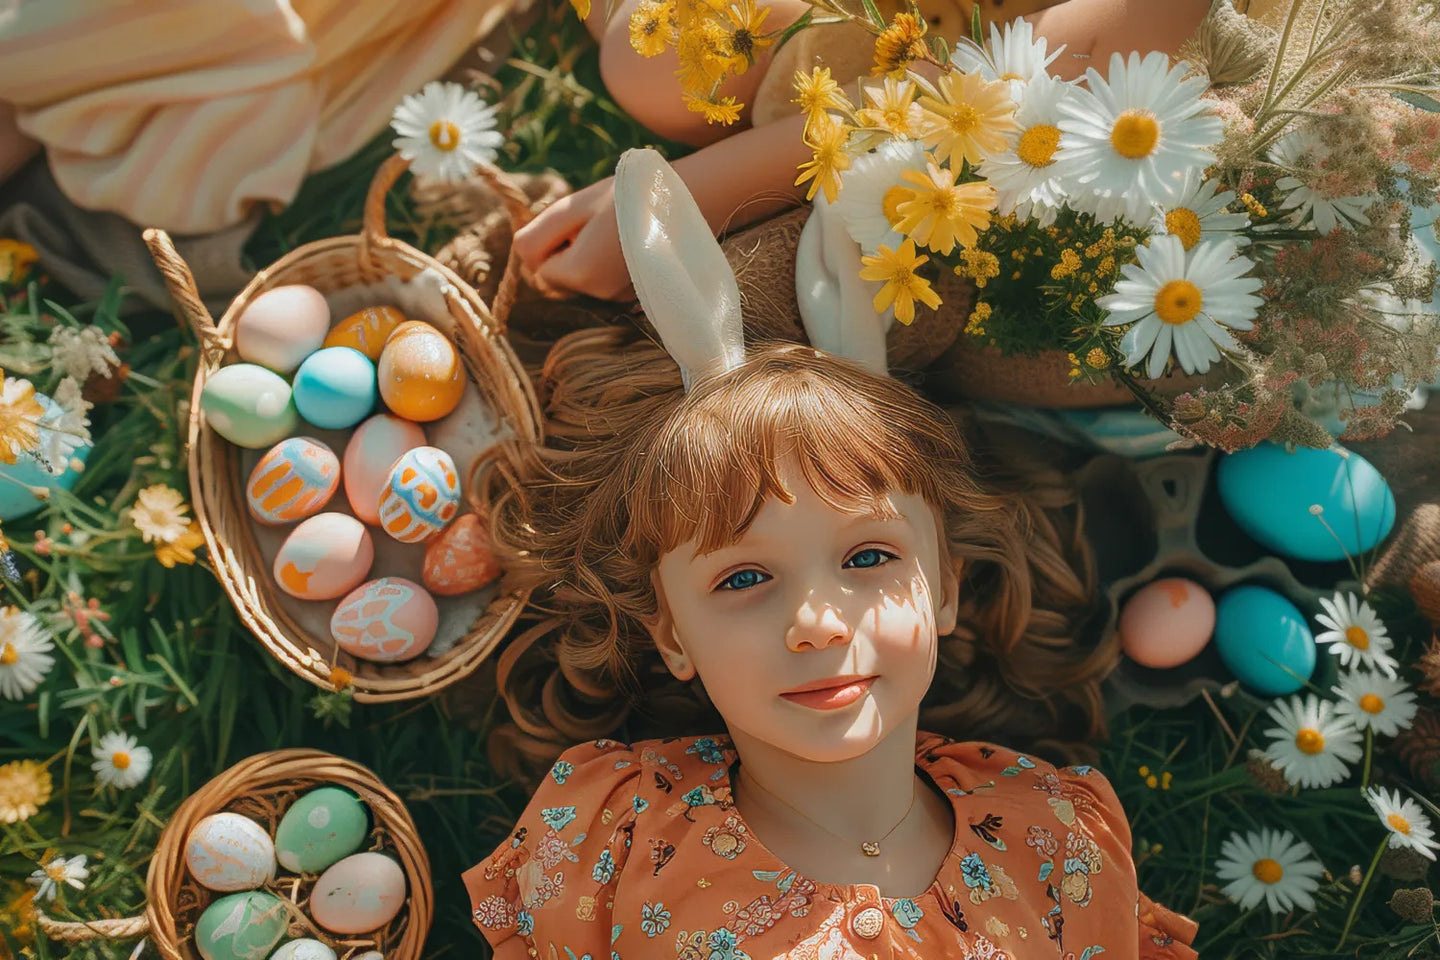 15 Easter Ideas for Kids: Activities, Baskets and More